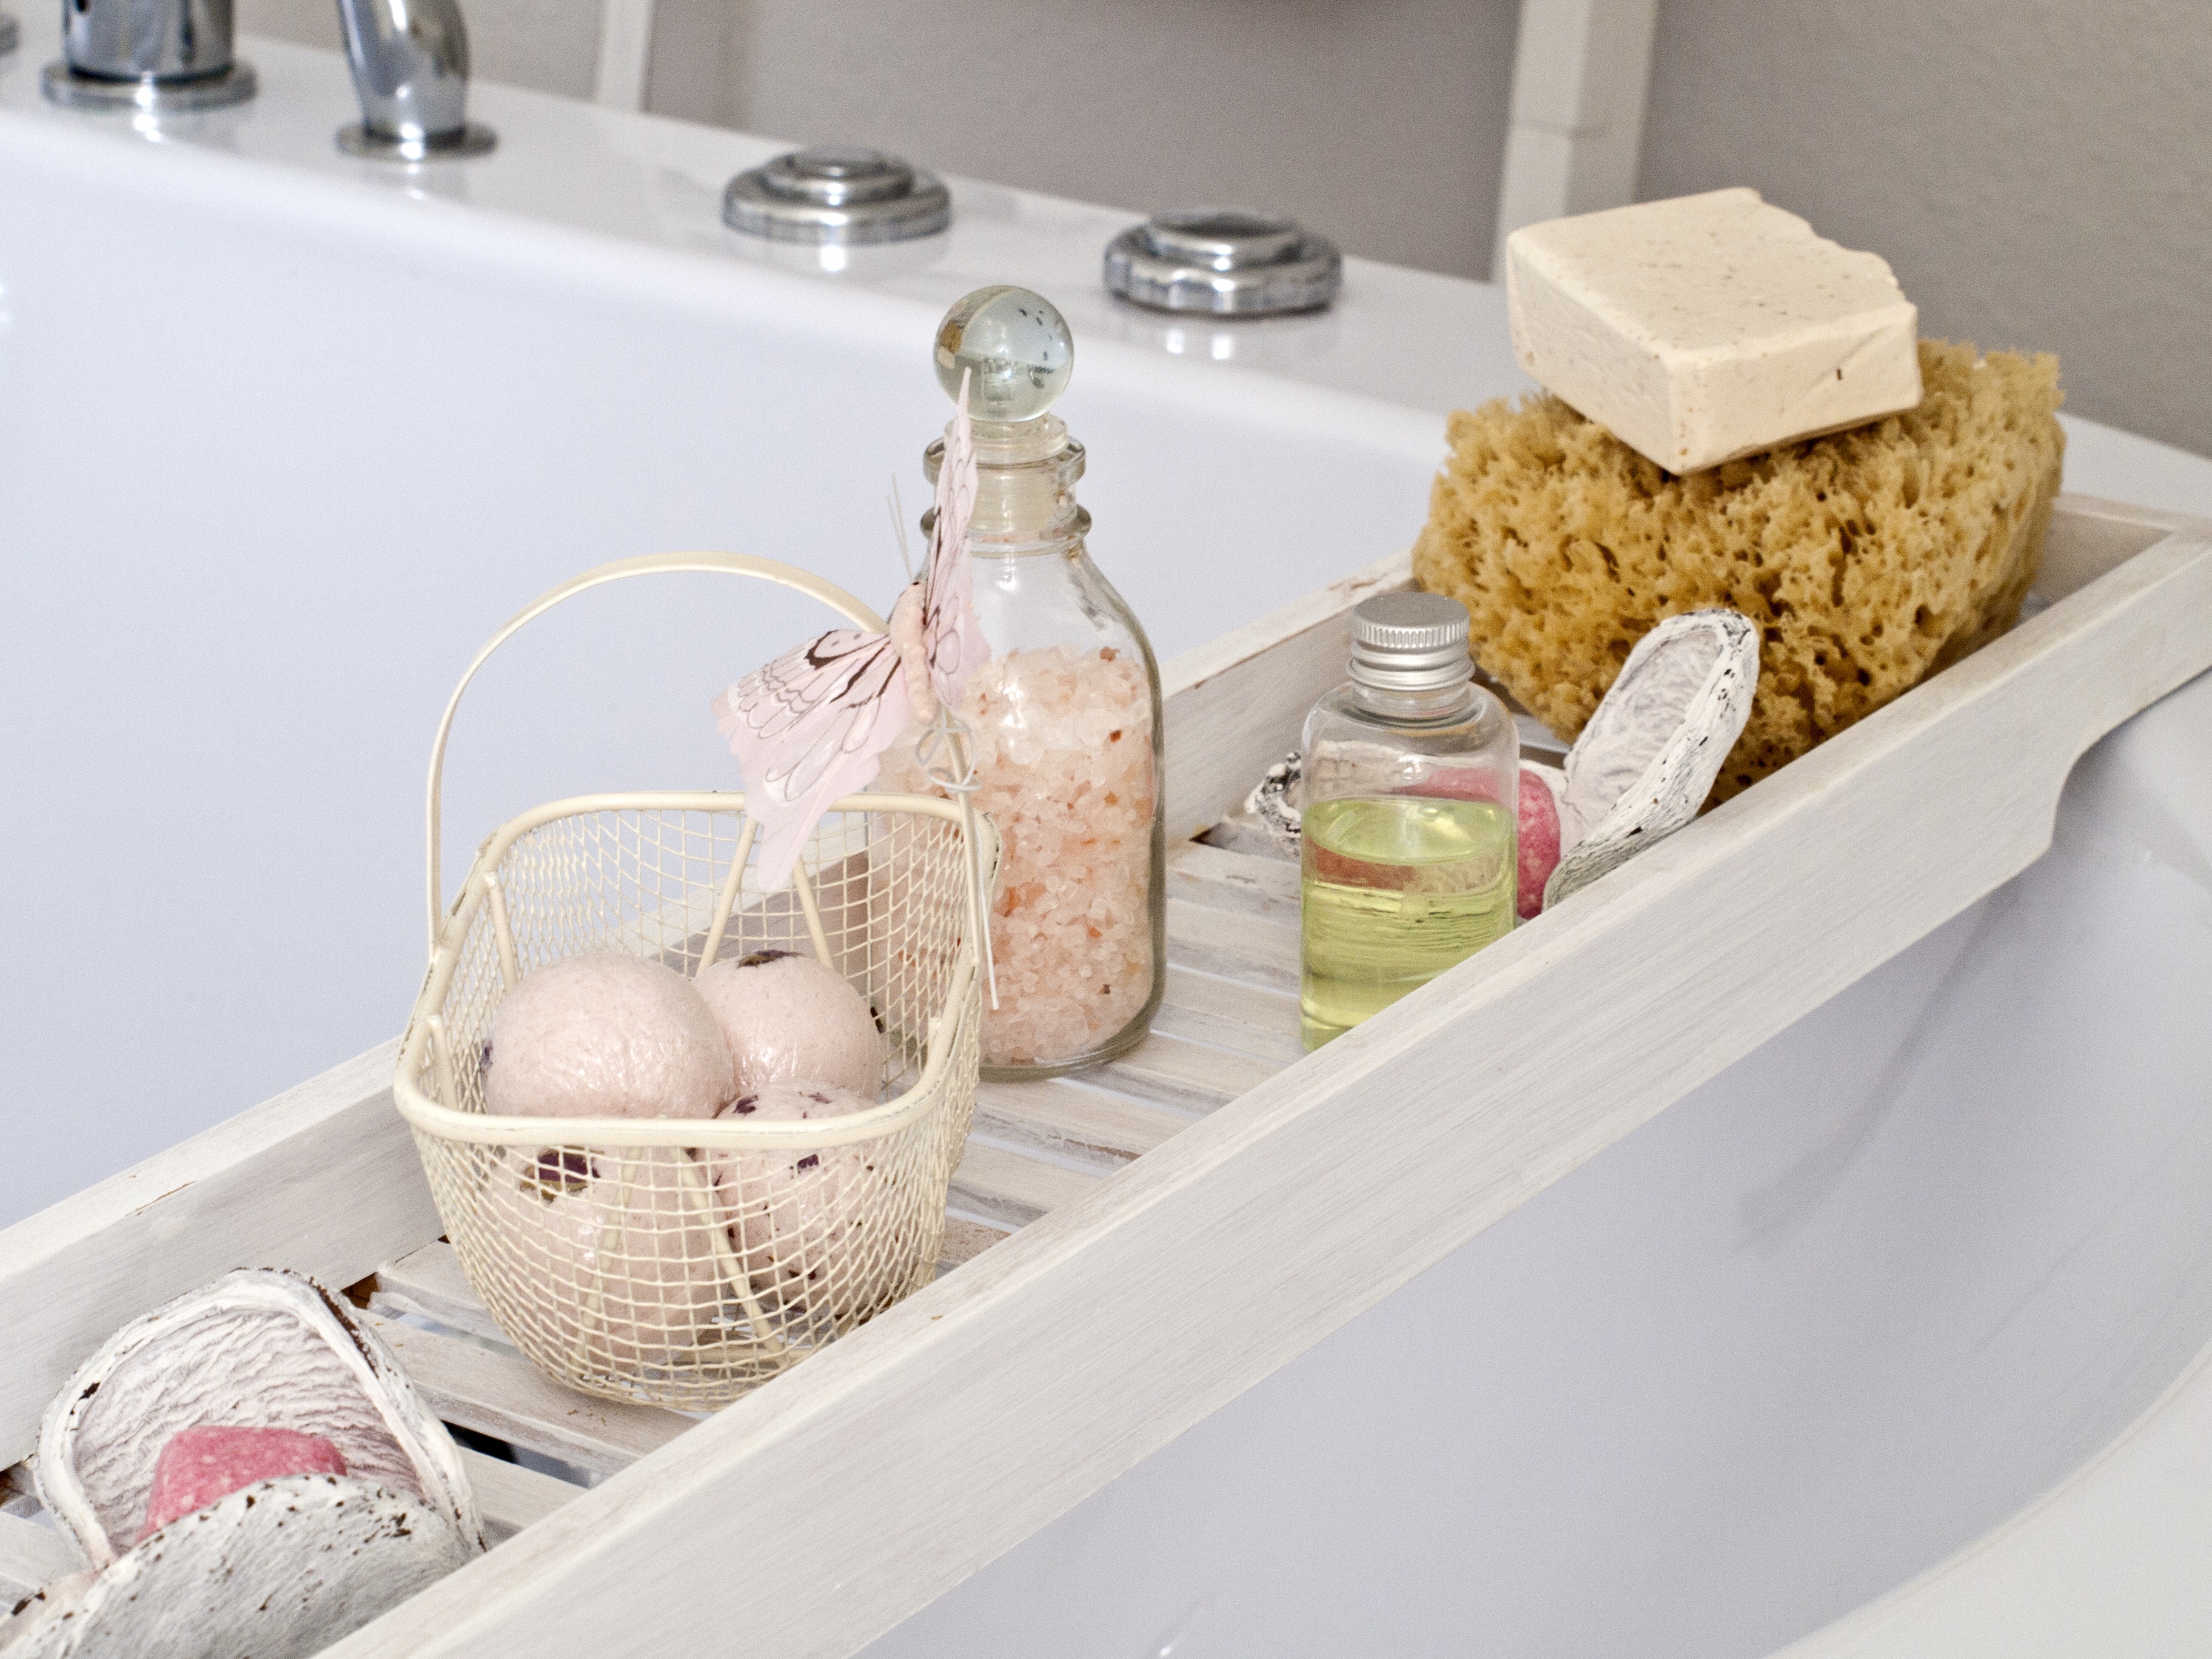 Parents relax around the home. A photo of a bath with bath bombs and bottles of bath oil. A relaxing neutral scene